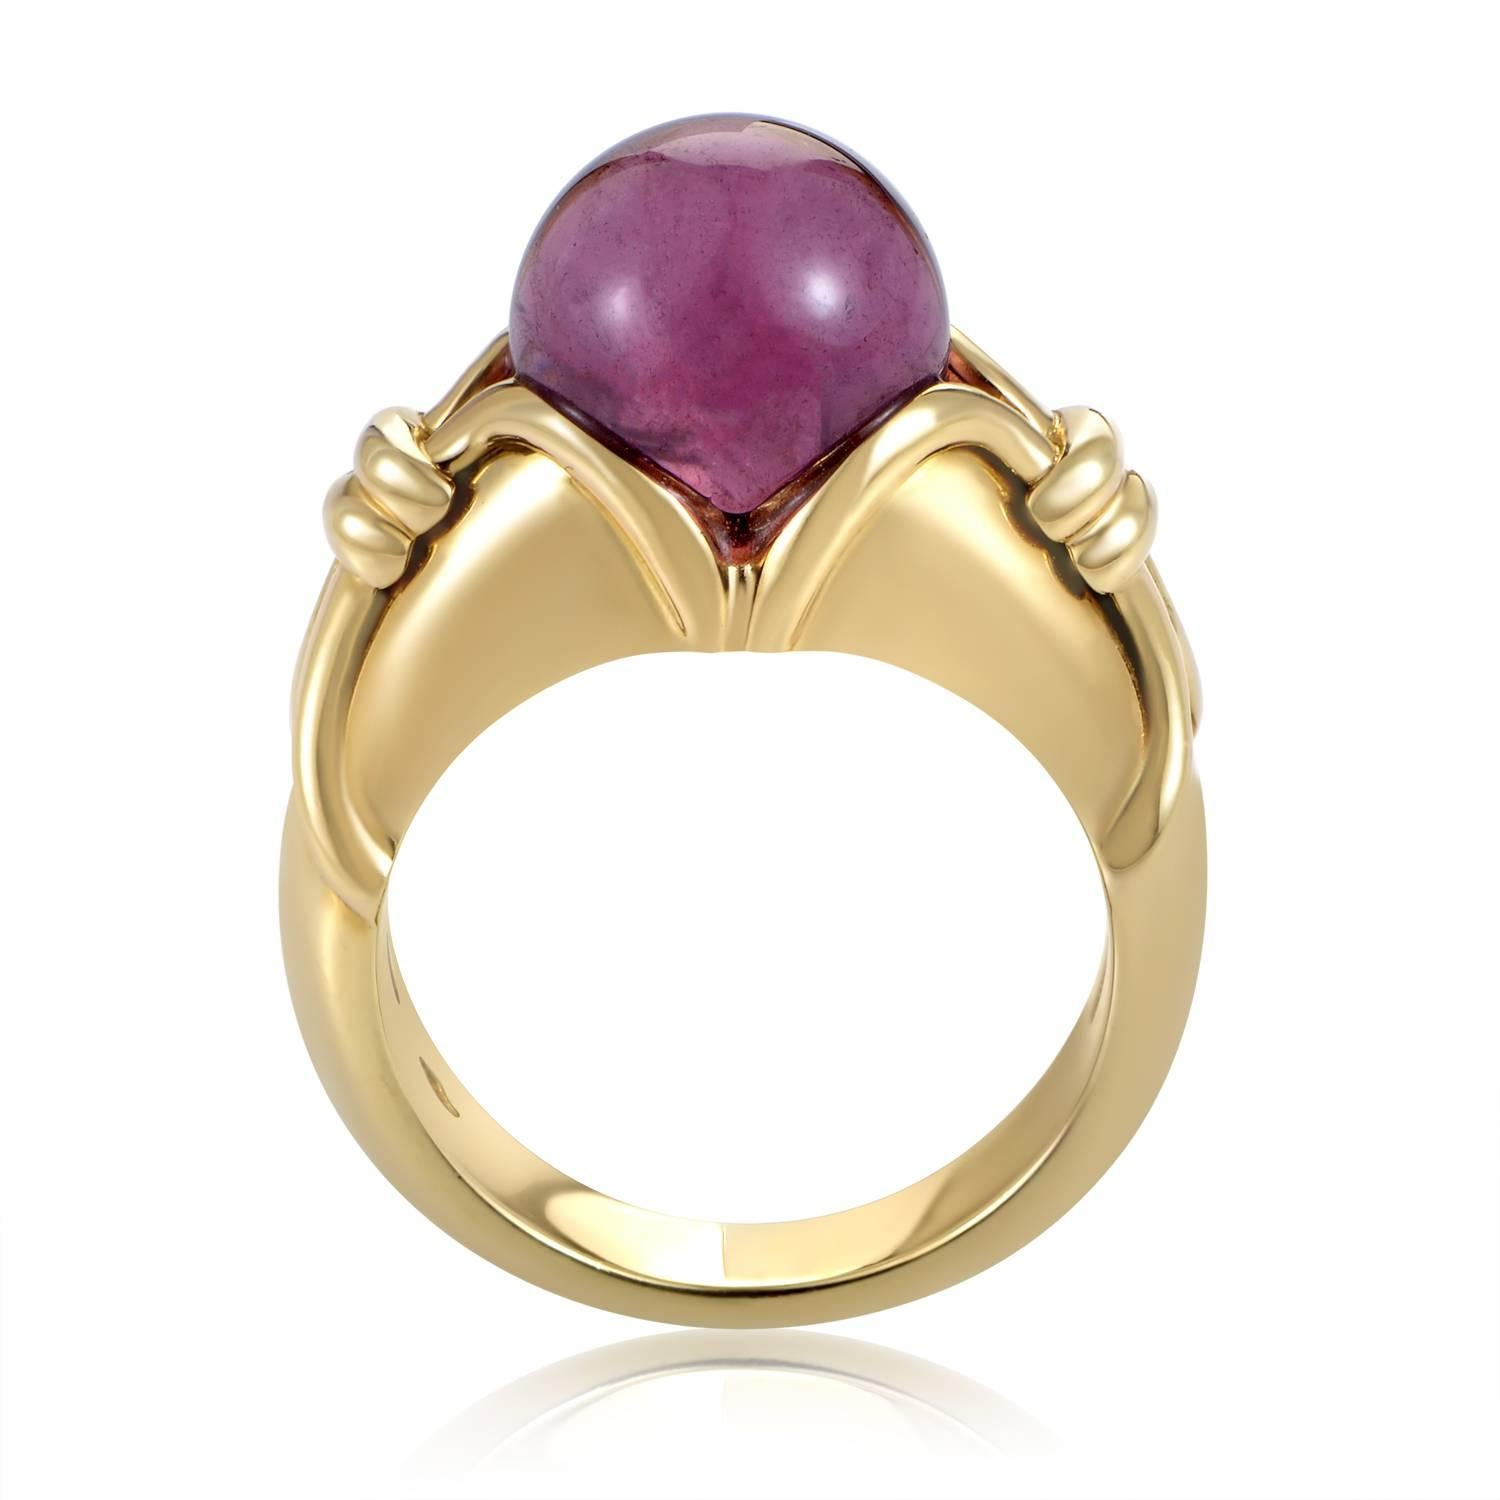 Upon a fabulously ornamented body made of unblemished 18K yellow gold, a magnificent pink tourmaline exudes its delightful nuance to perfectly complement the allure of gold radiating from beneath, creating a memorable sight in this outstanding ring